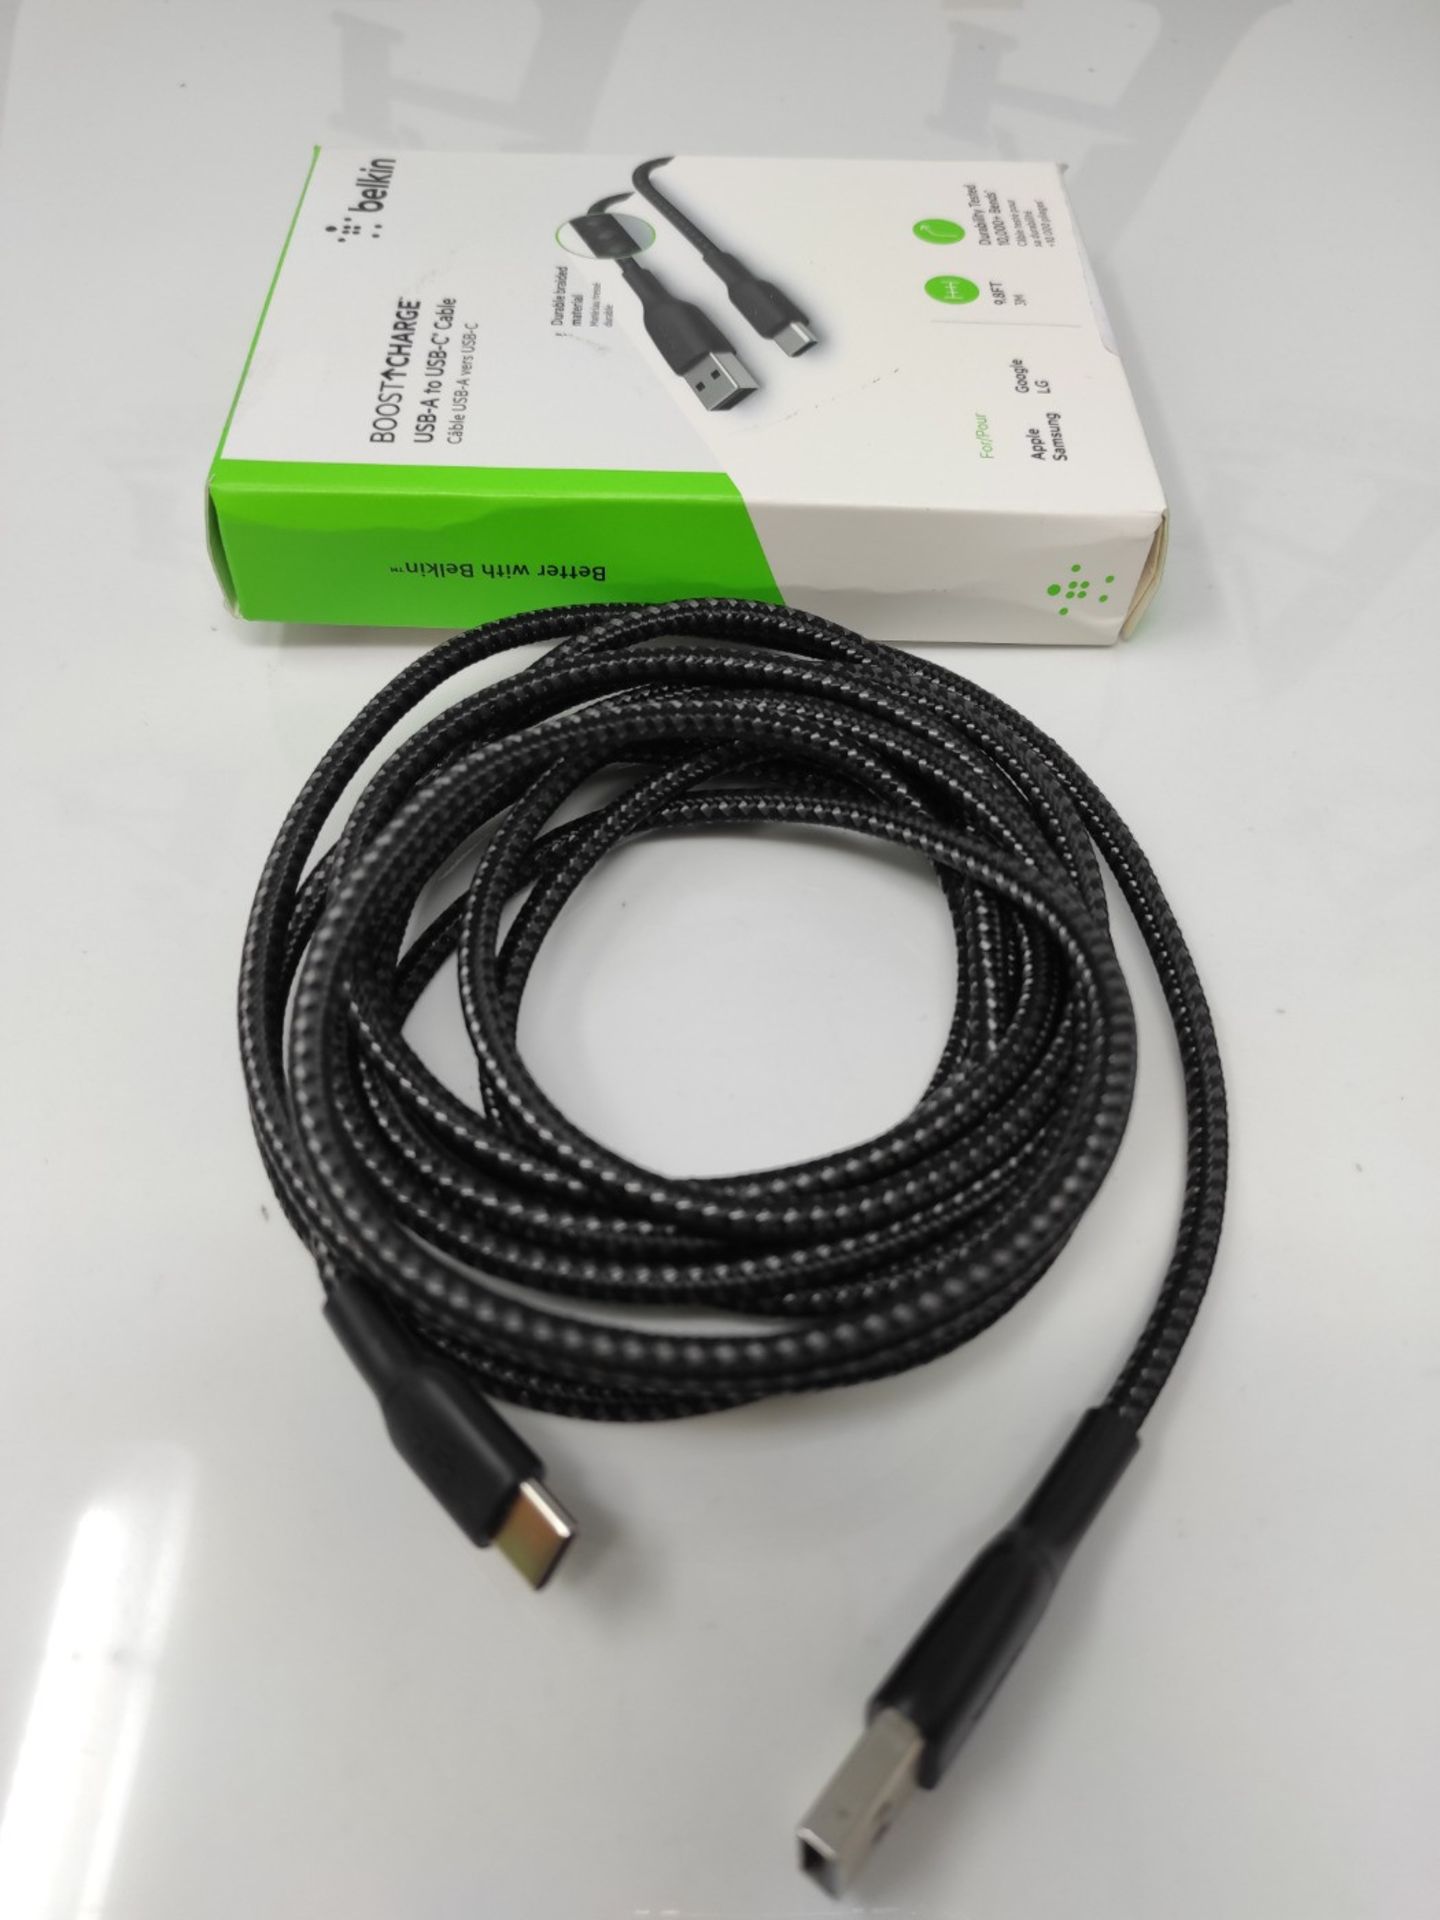 Belkin BoostCharge Braided USB C charger cable, USB-C to USB-A cable, USB type C charg - Image 2 of 2